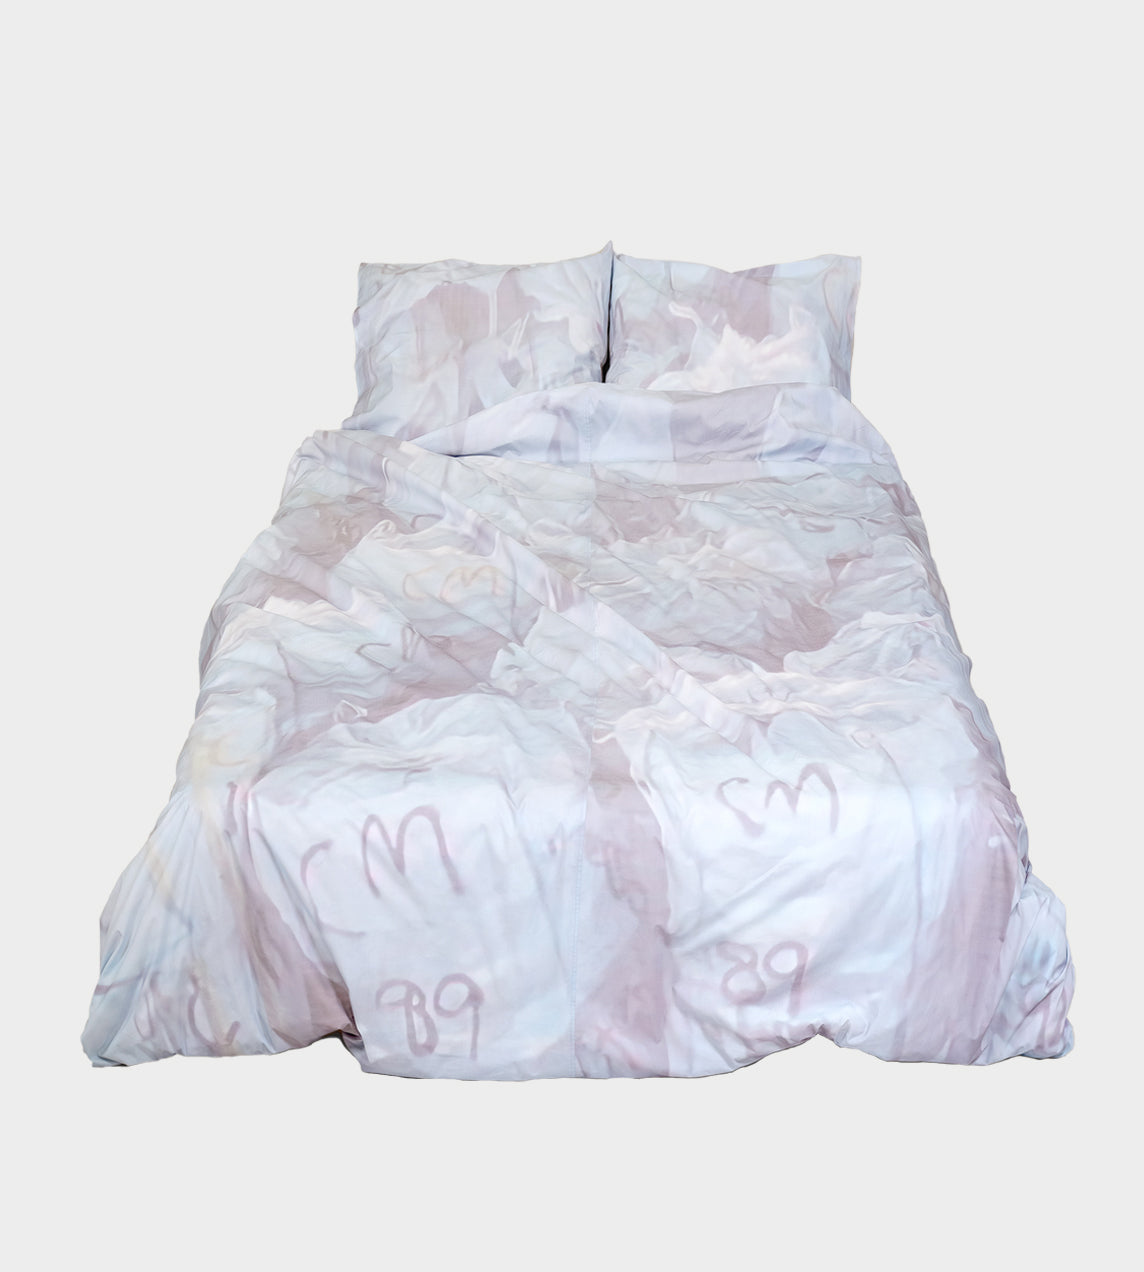 Serapis - 'White Bags' Queen Bed Sheets